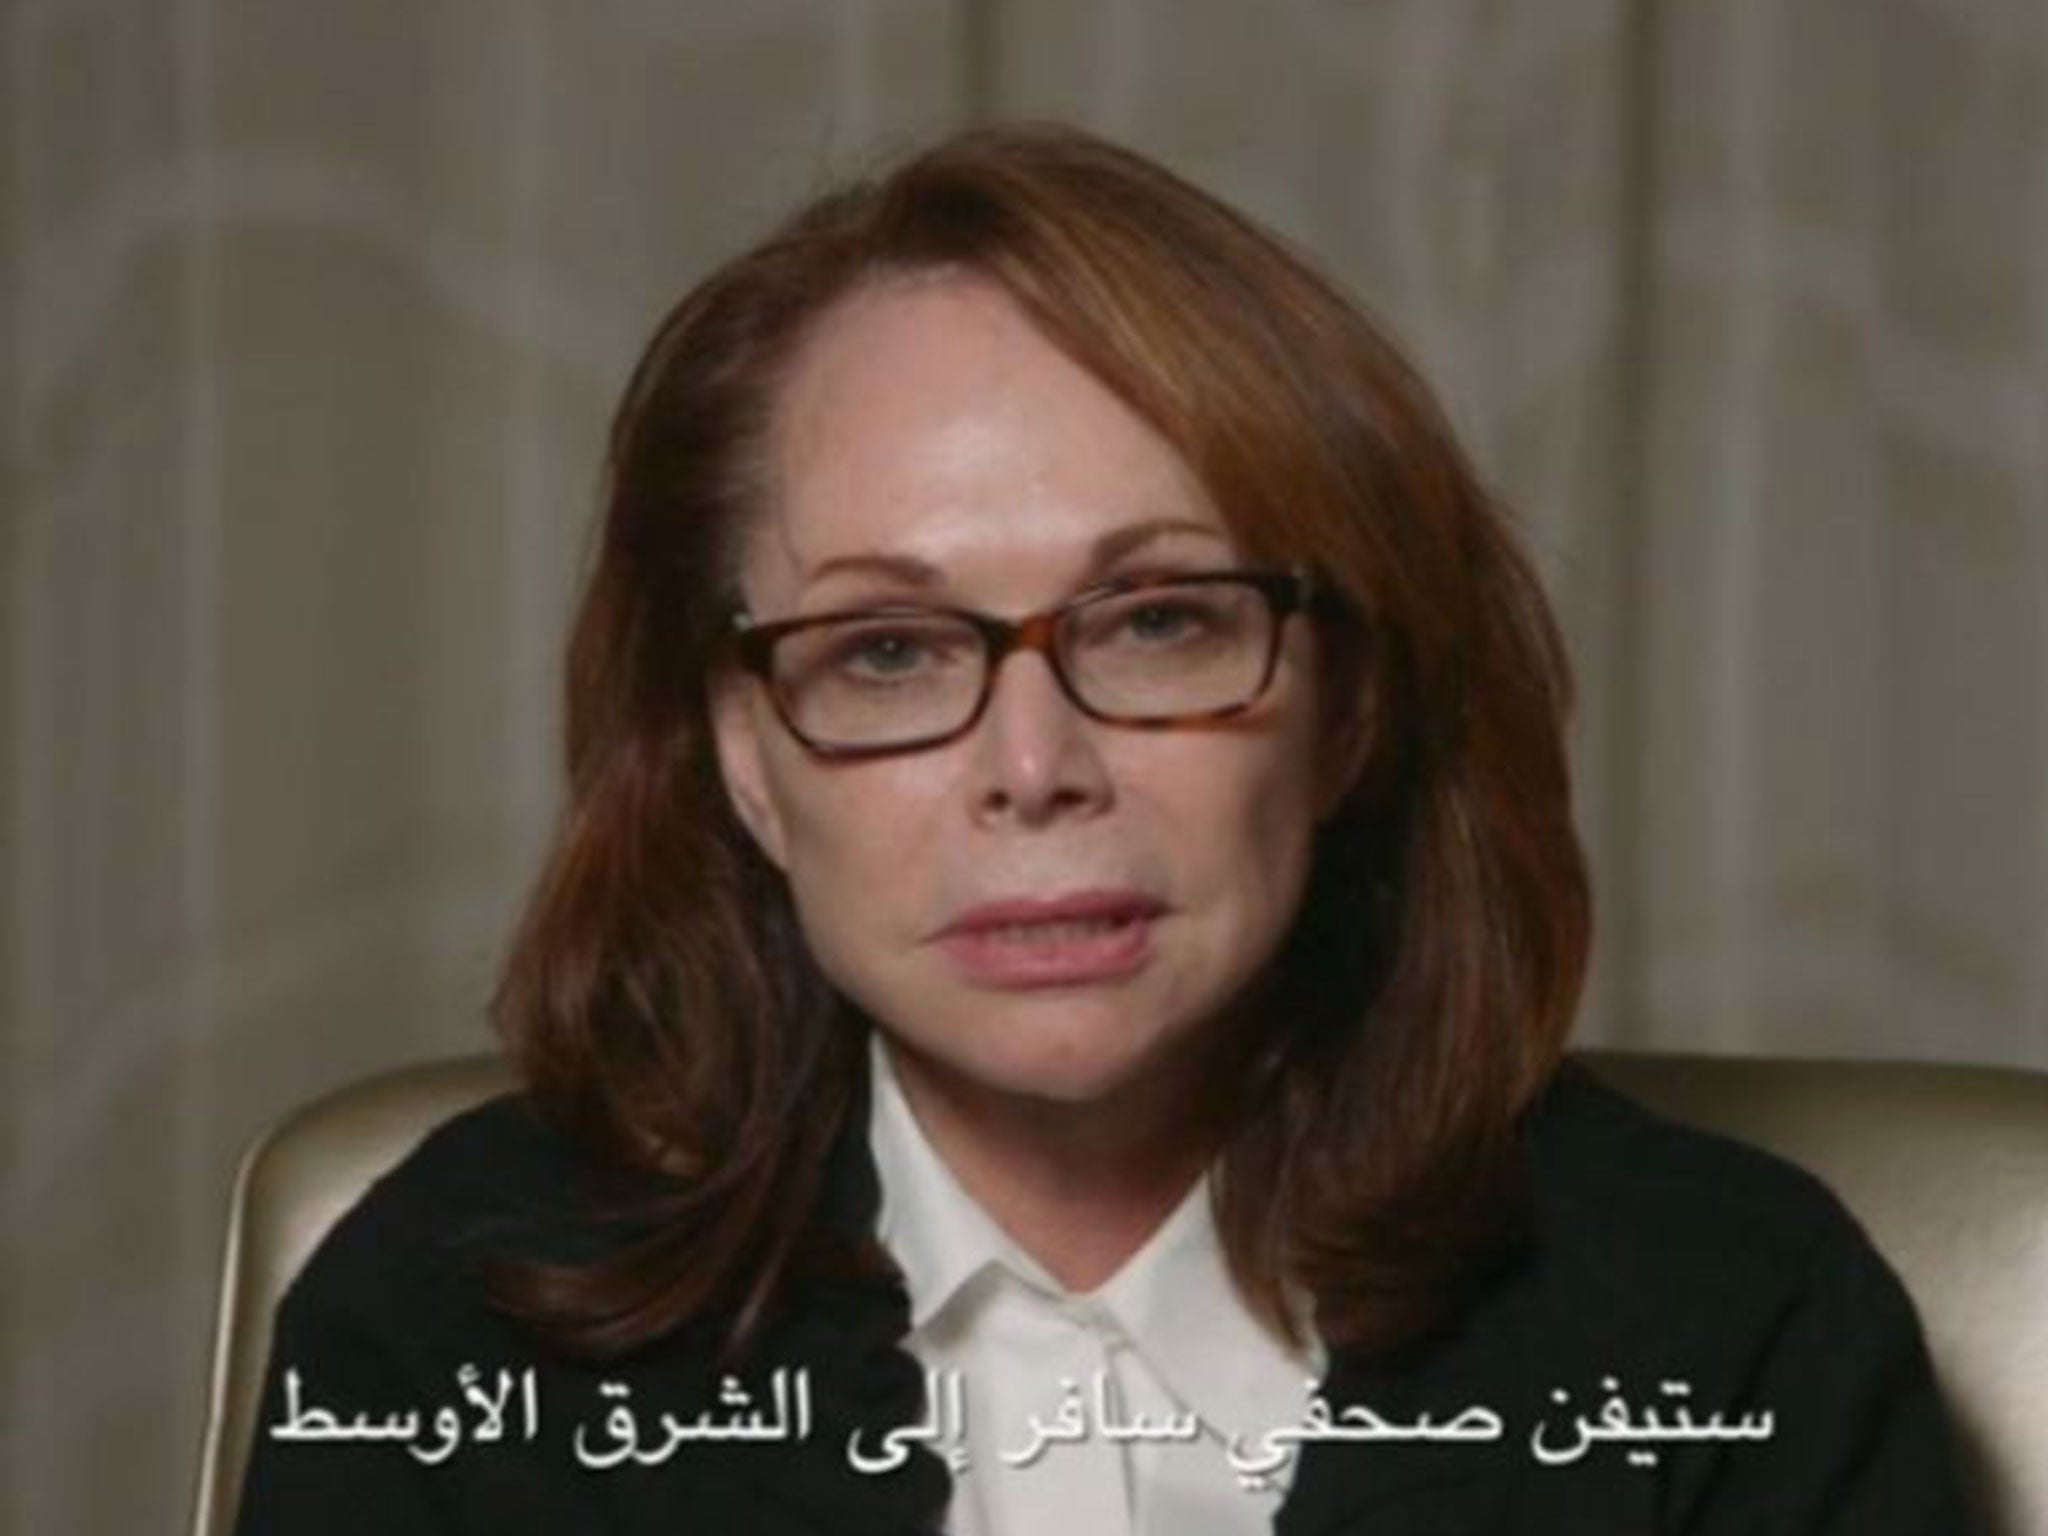 Shirley Sotloff, who lives in Florida, appeals to the captors of her son, freelance journalist Steven Sotloff